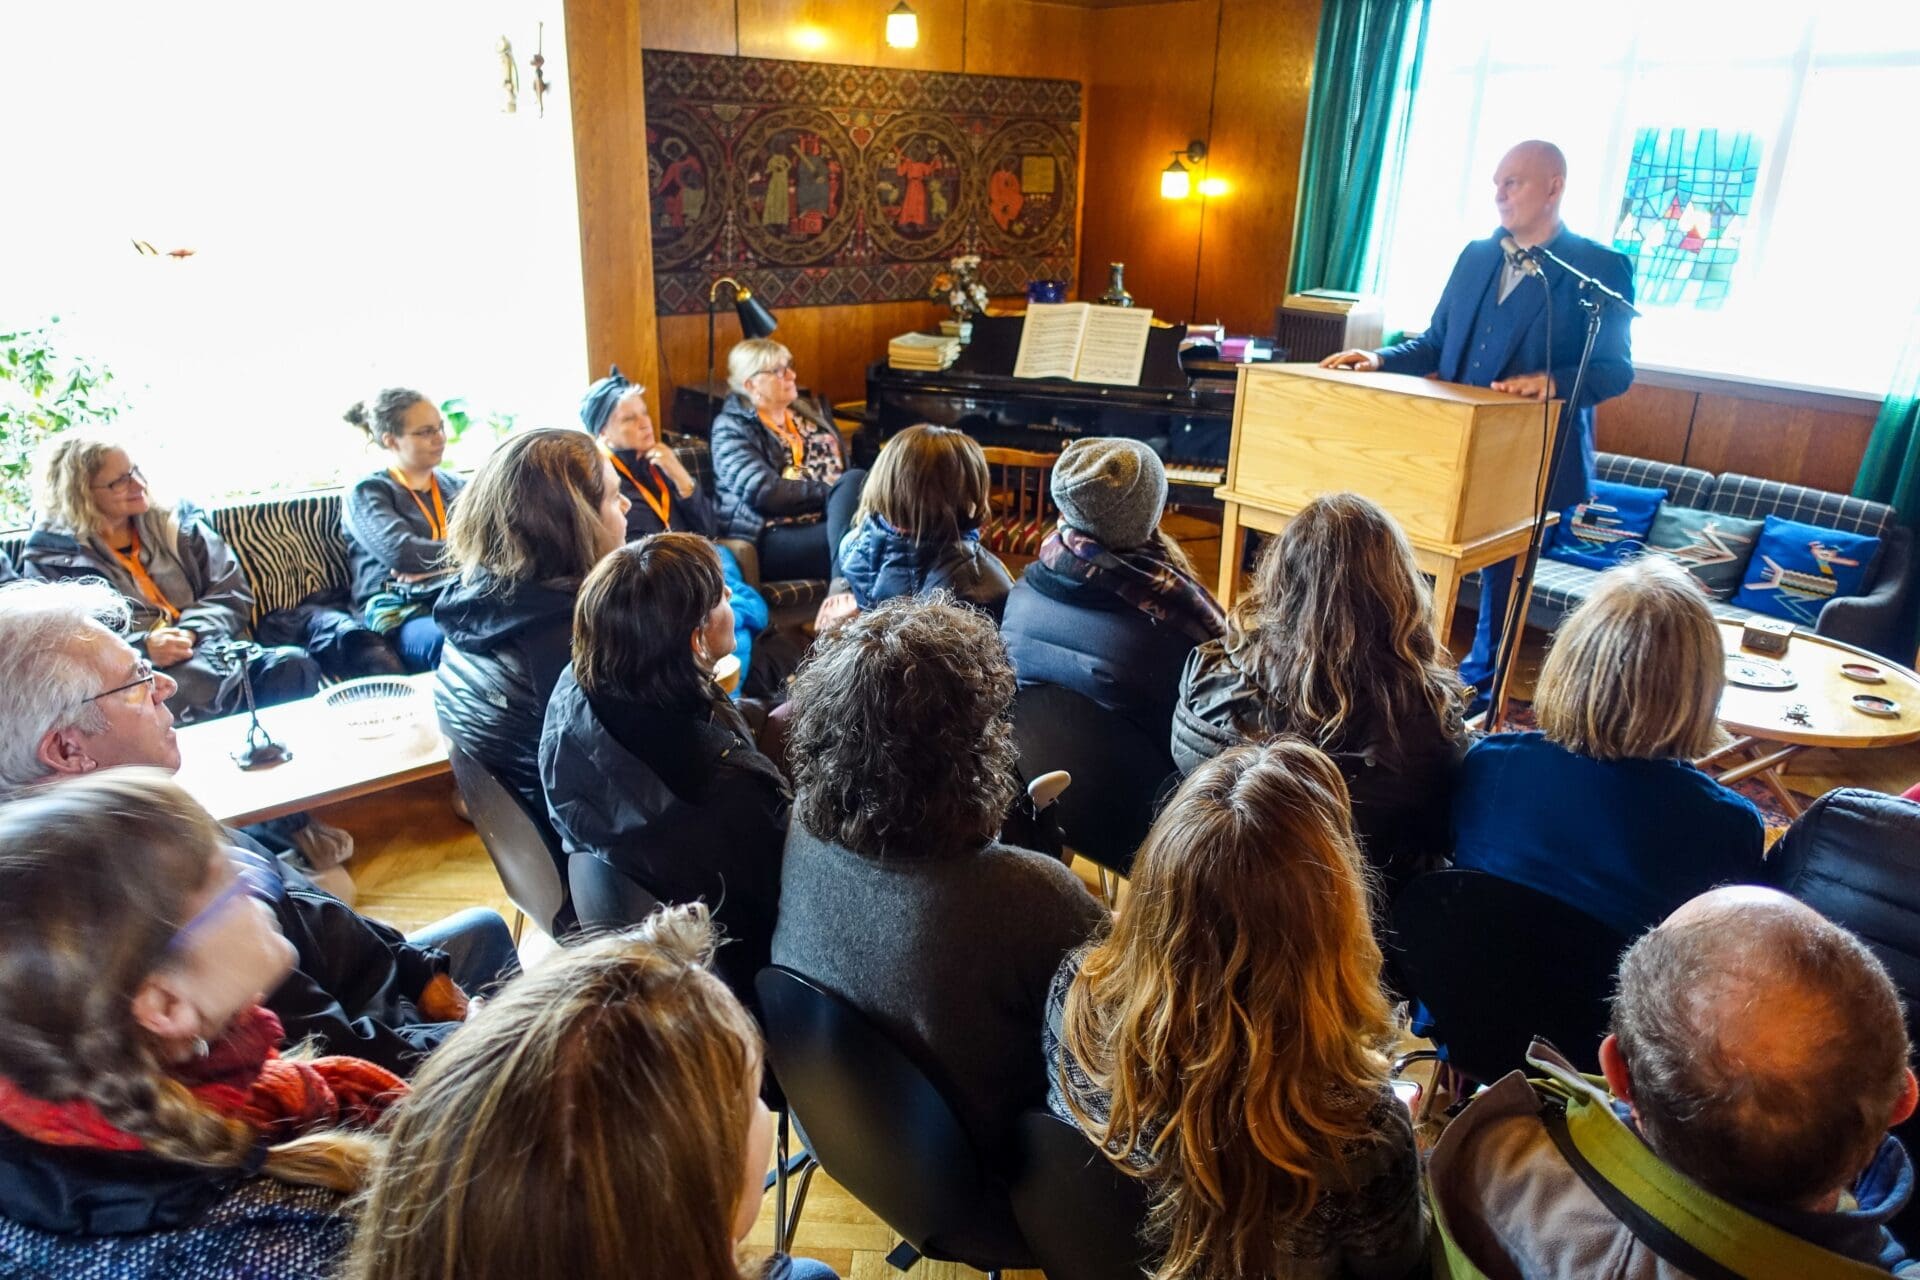 Professional writers learning from the experiences of published authors at the Iceland Writers Retreat in Iceland.